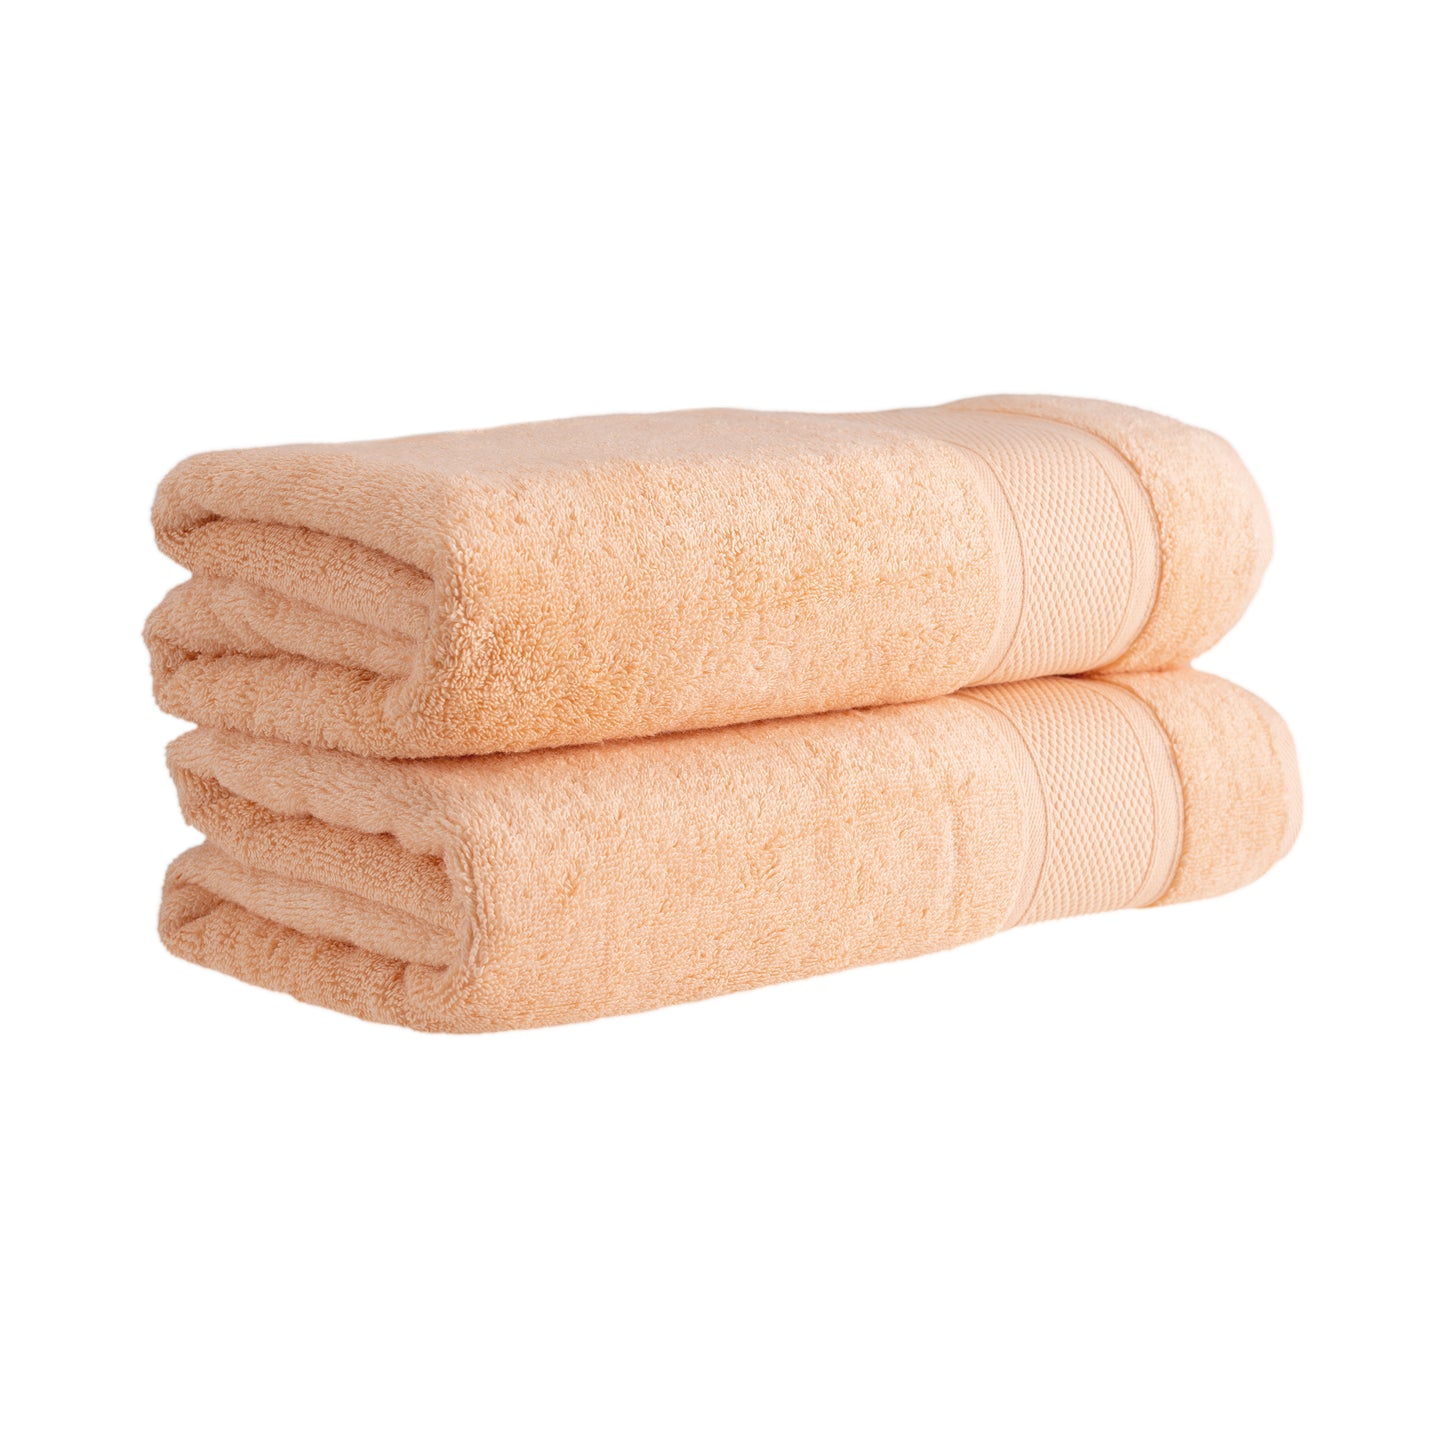 HALLEY Bath Towels 2-Pack - 100% Turkish Cotton Ultra Soft, Absorbent Bathroom Towels - Premium Quality, Machine Washable - Coral